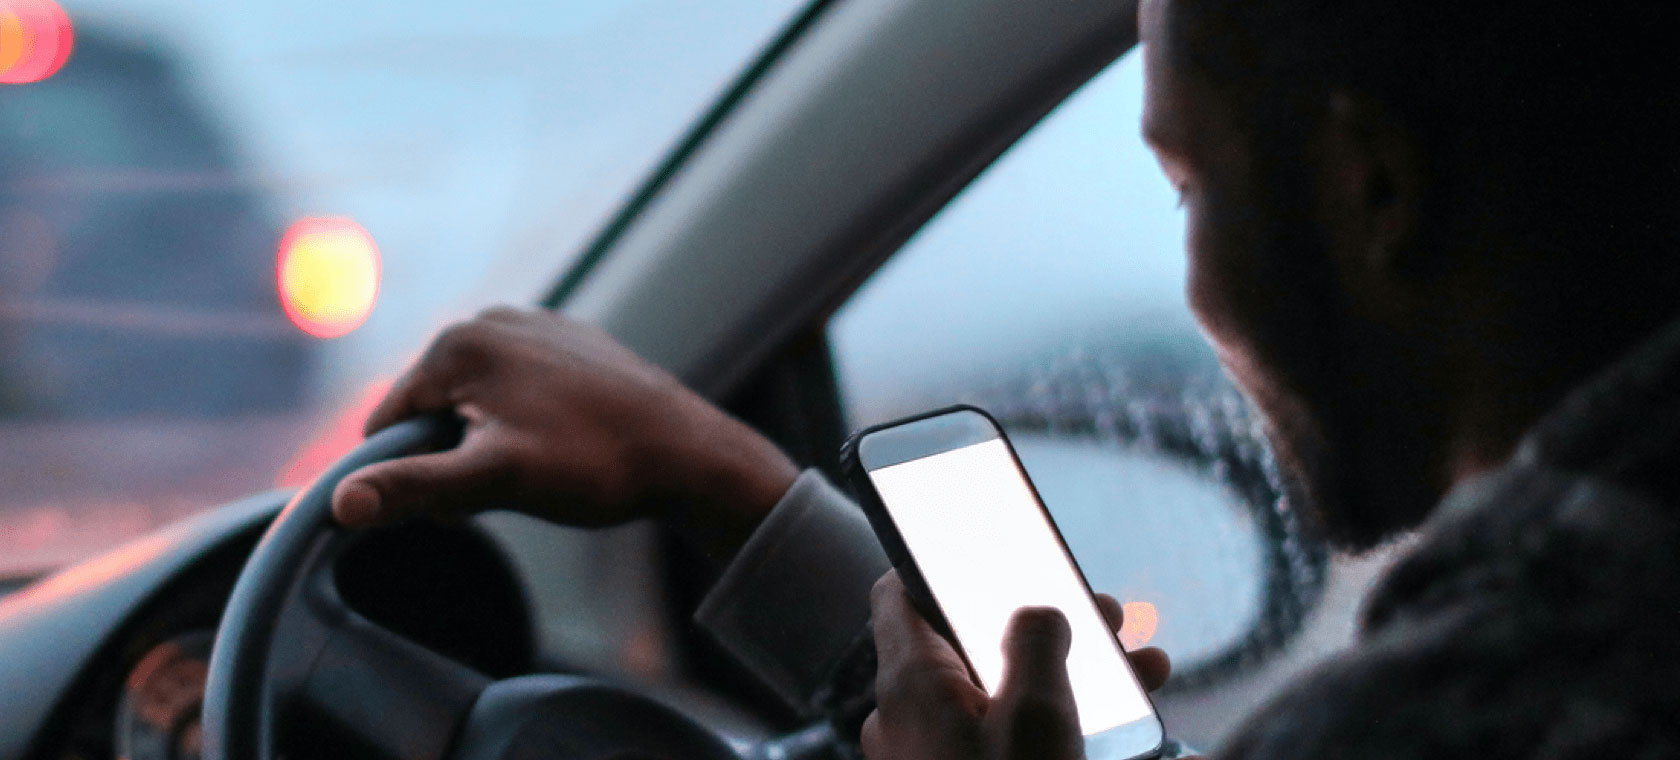 Distracted Driving Laws: Texting and Cellphones